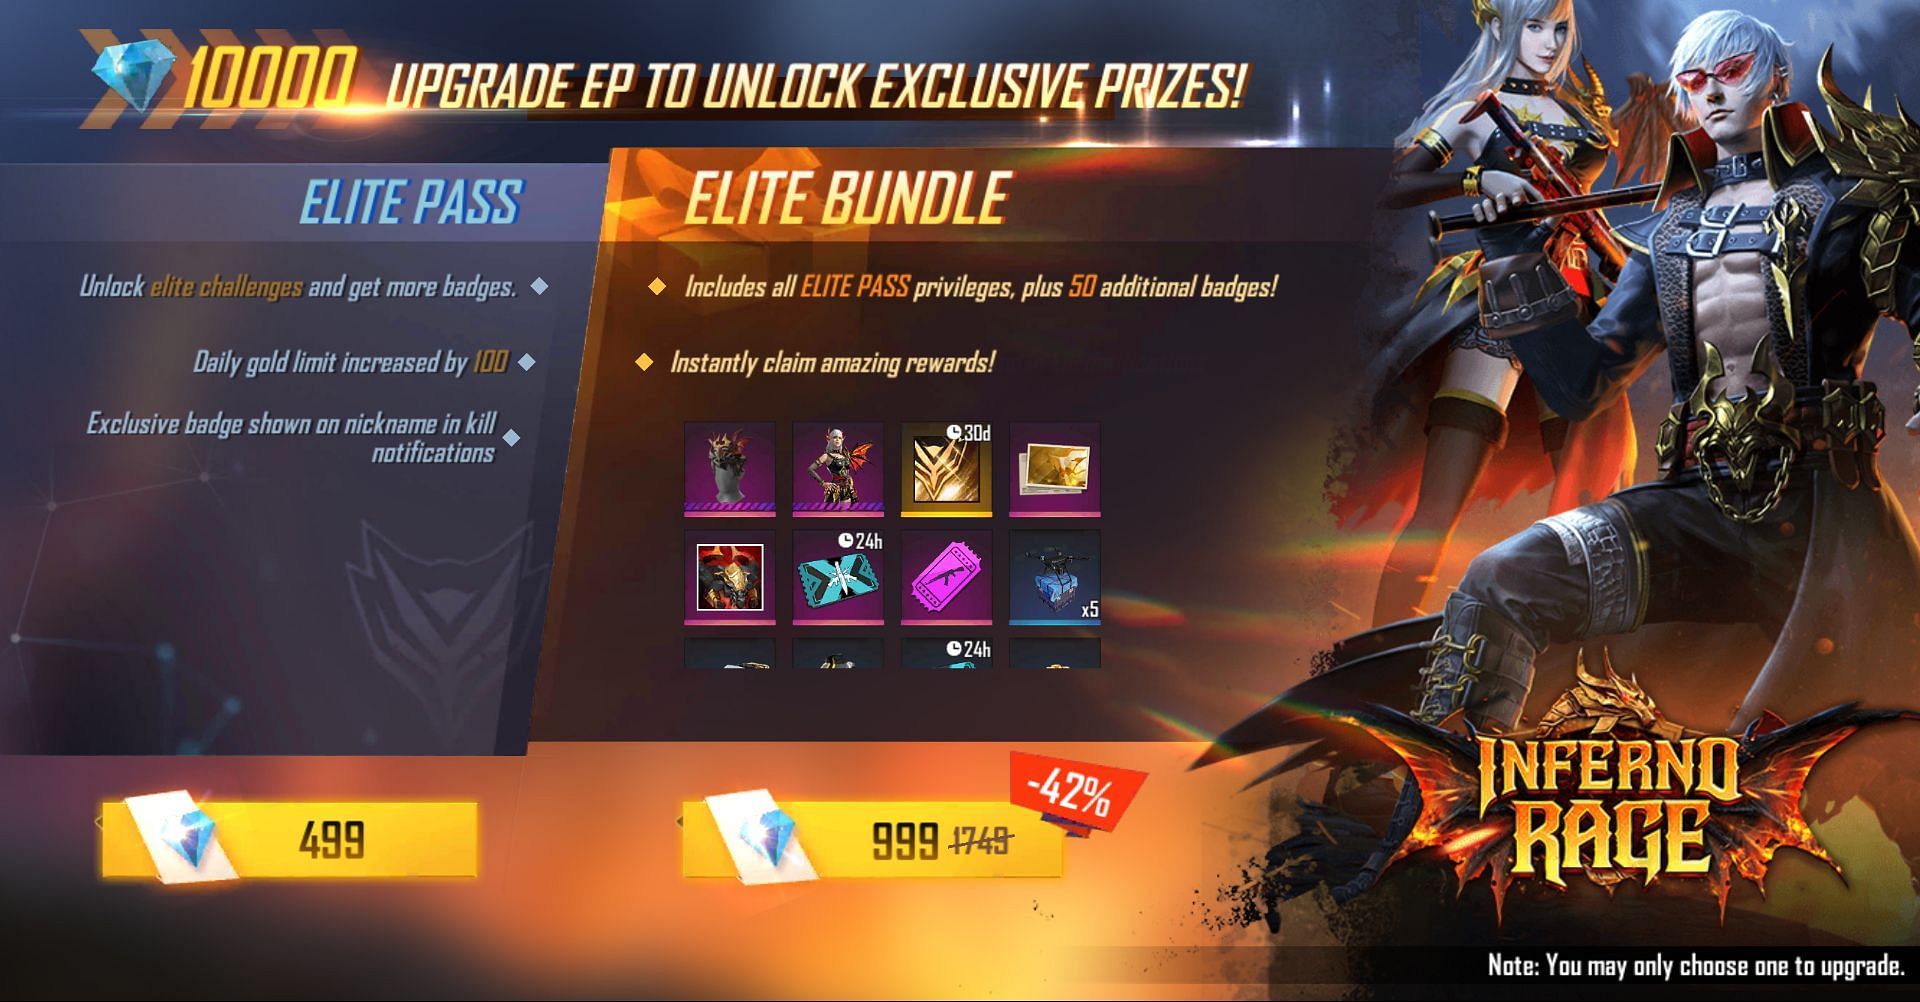 How To Get Free Diamonds And Upgrade To Elite Pass For Free In